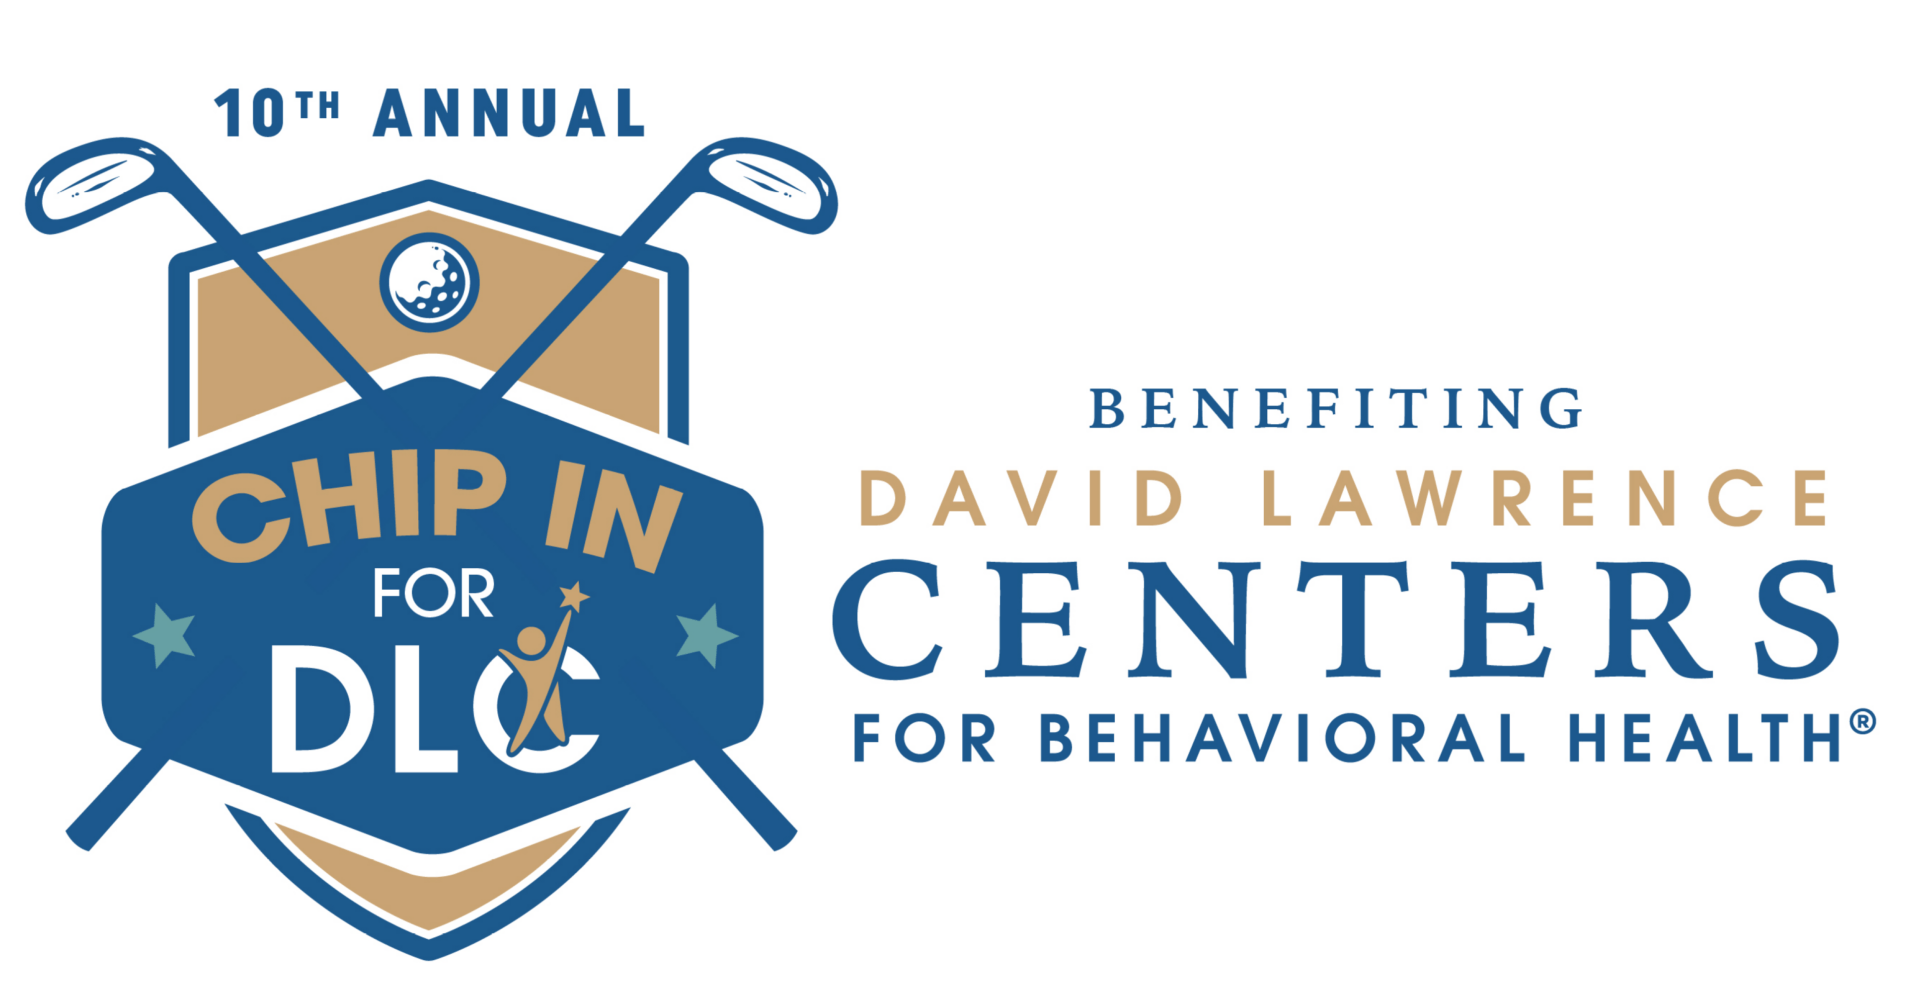 10th Annual Chip in for DLC Golf Tournament